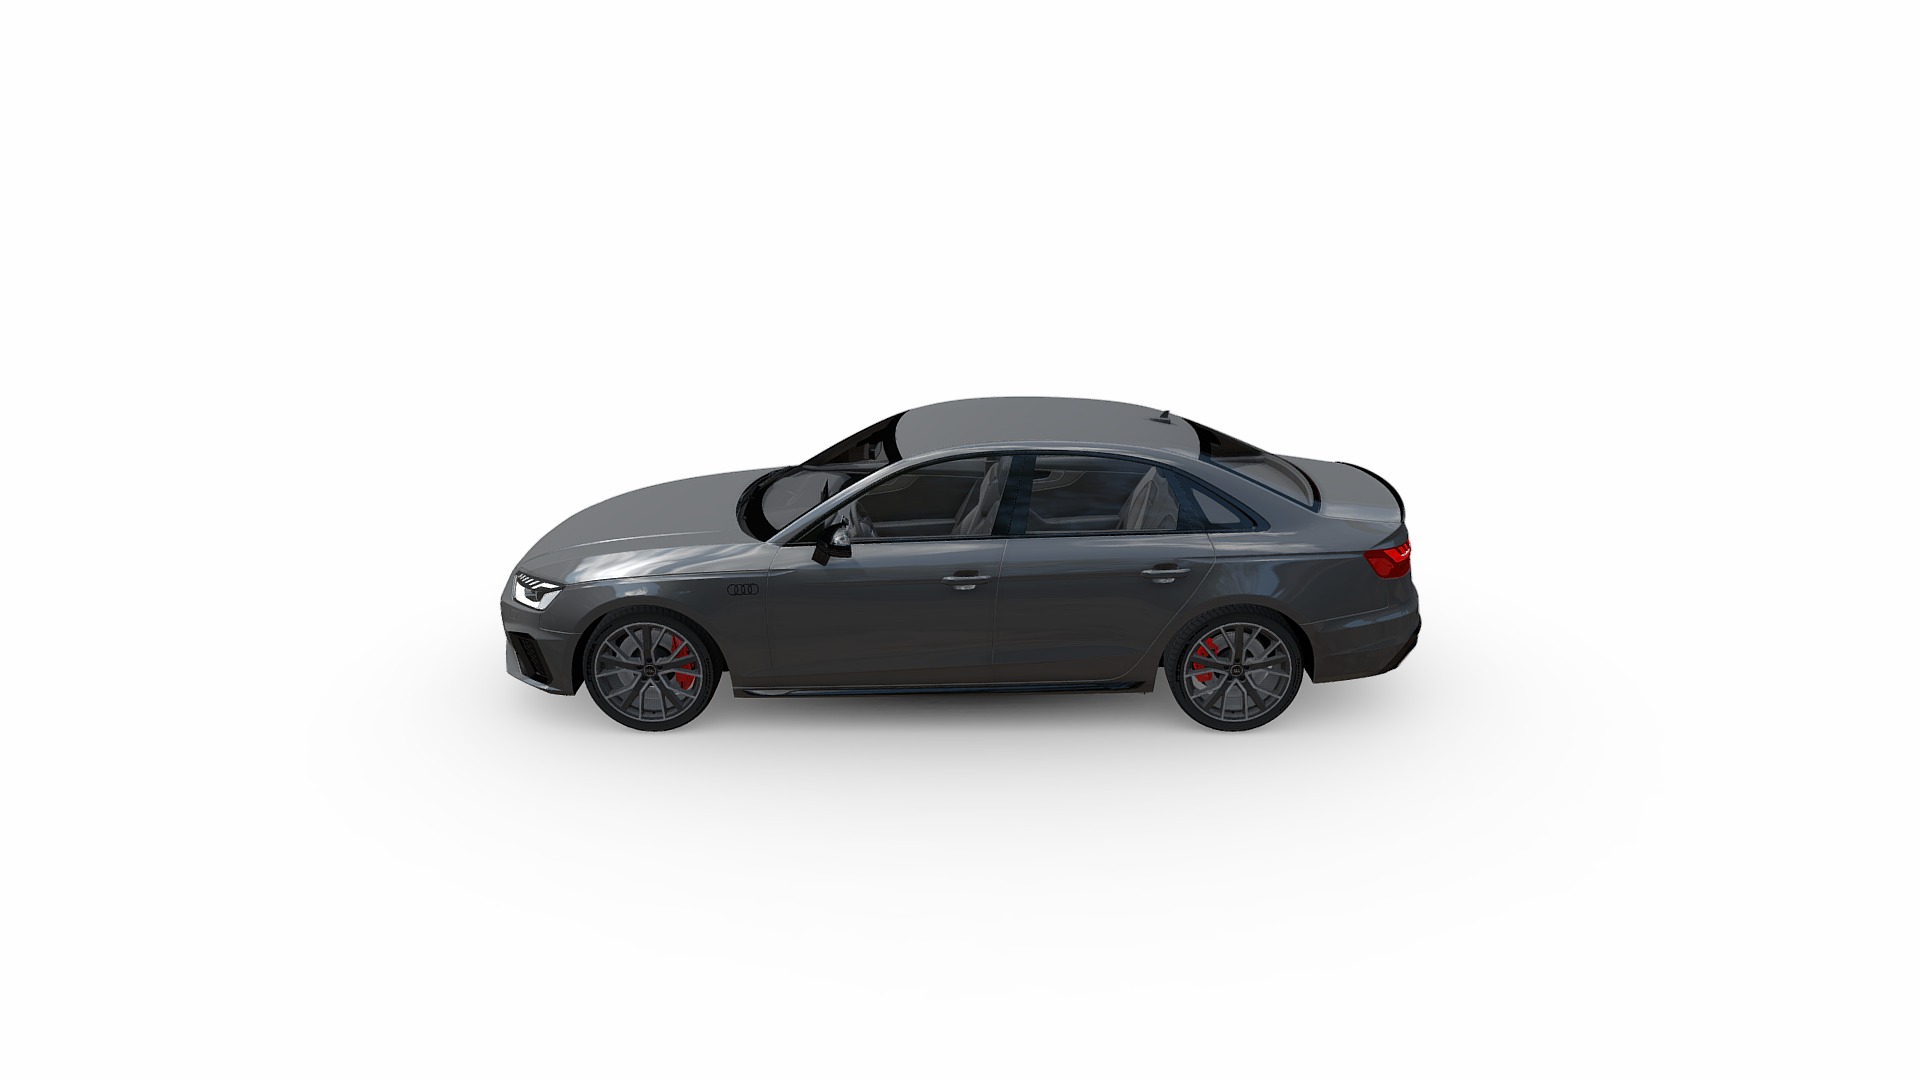 3D model Audi A4 Sline 2020 - This is a 3D model of the Audi A4 Sline 2020. The 3D model is about a silver car with a black top.